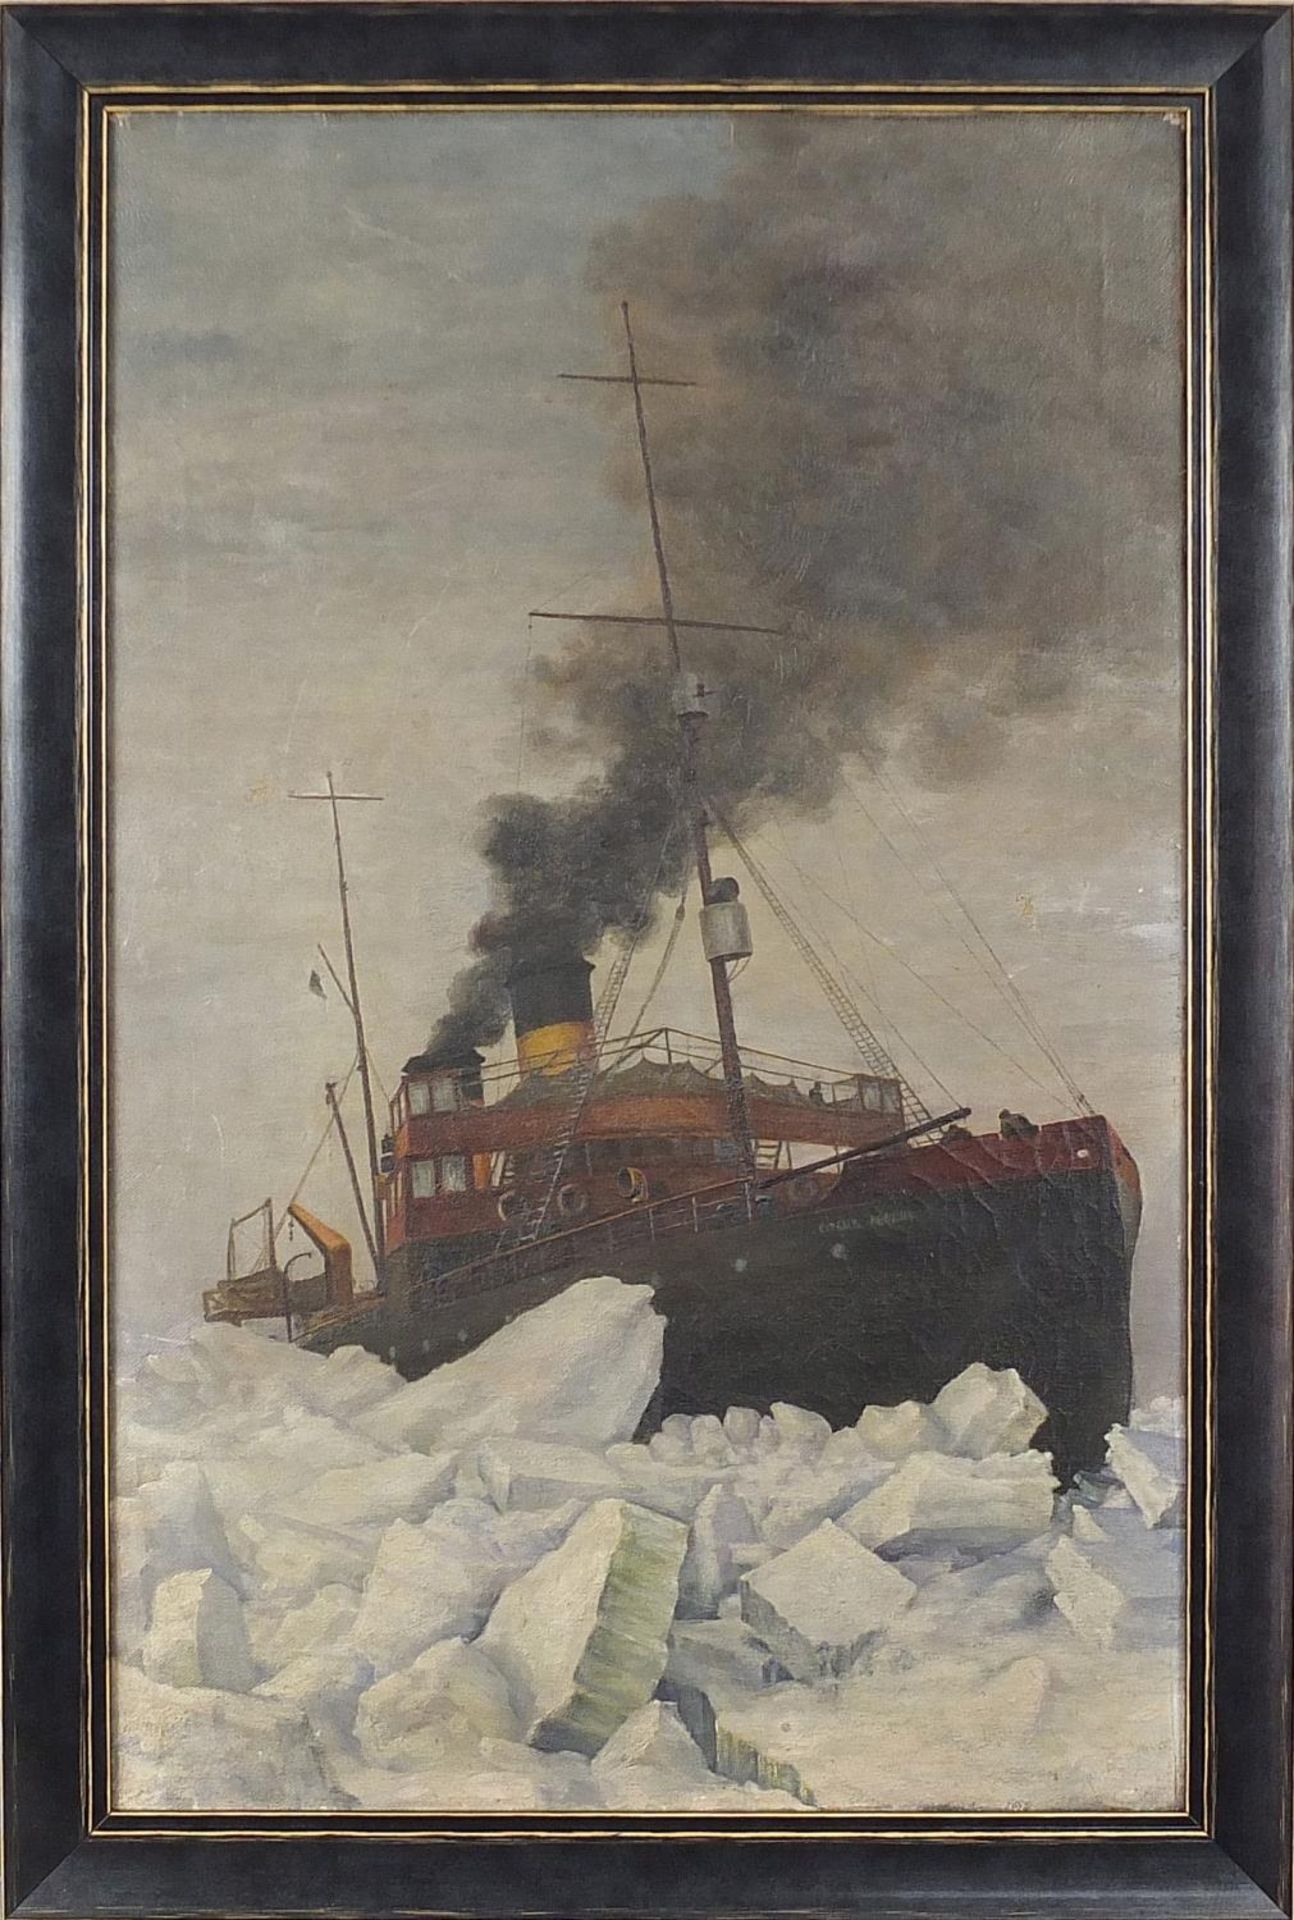 Russian ice breaker, 19th century century oil on canvas, Reeves & Sons stamp verso, mounted and - Image 4 of 10